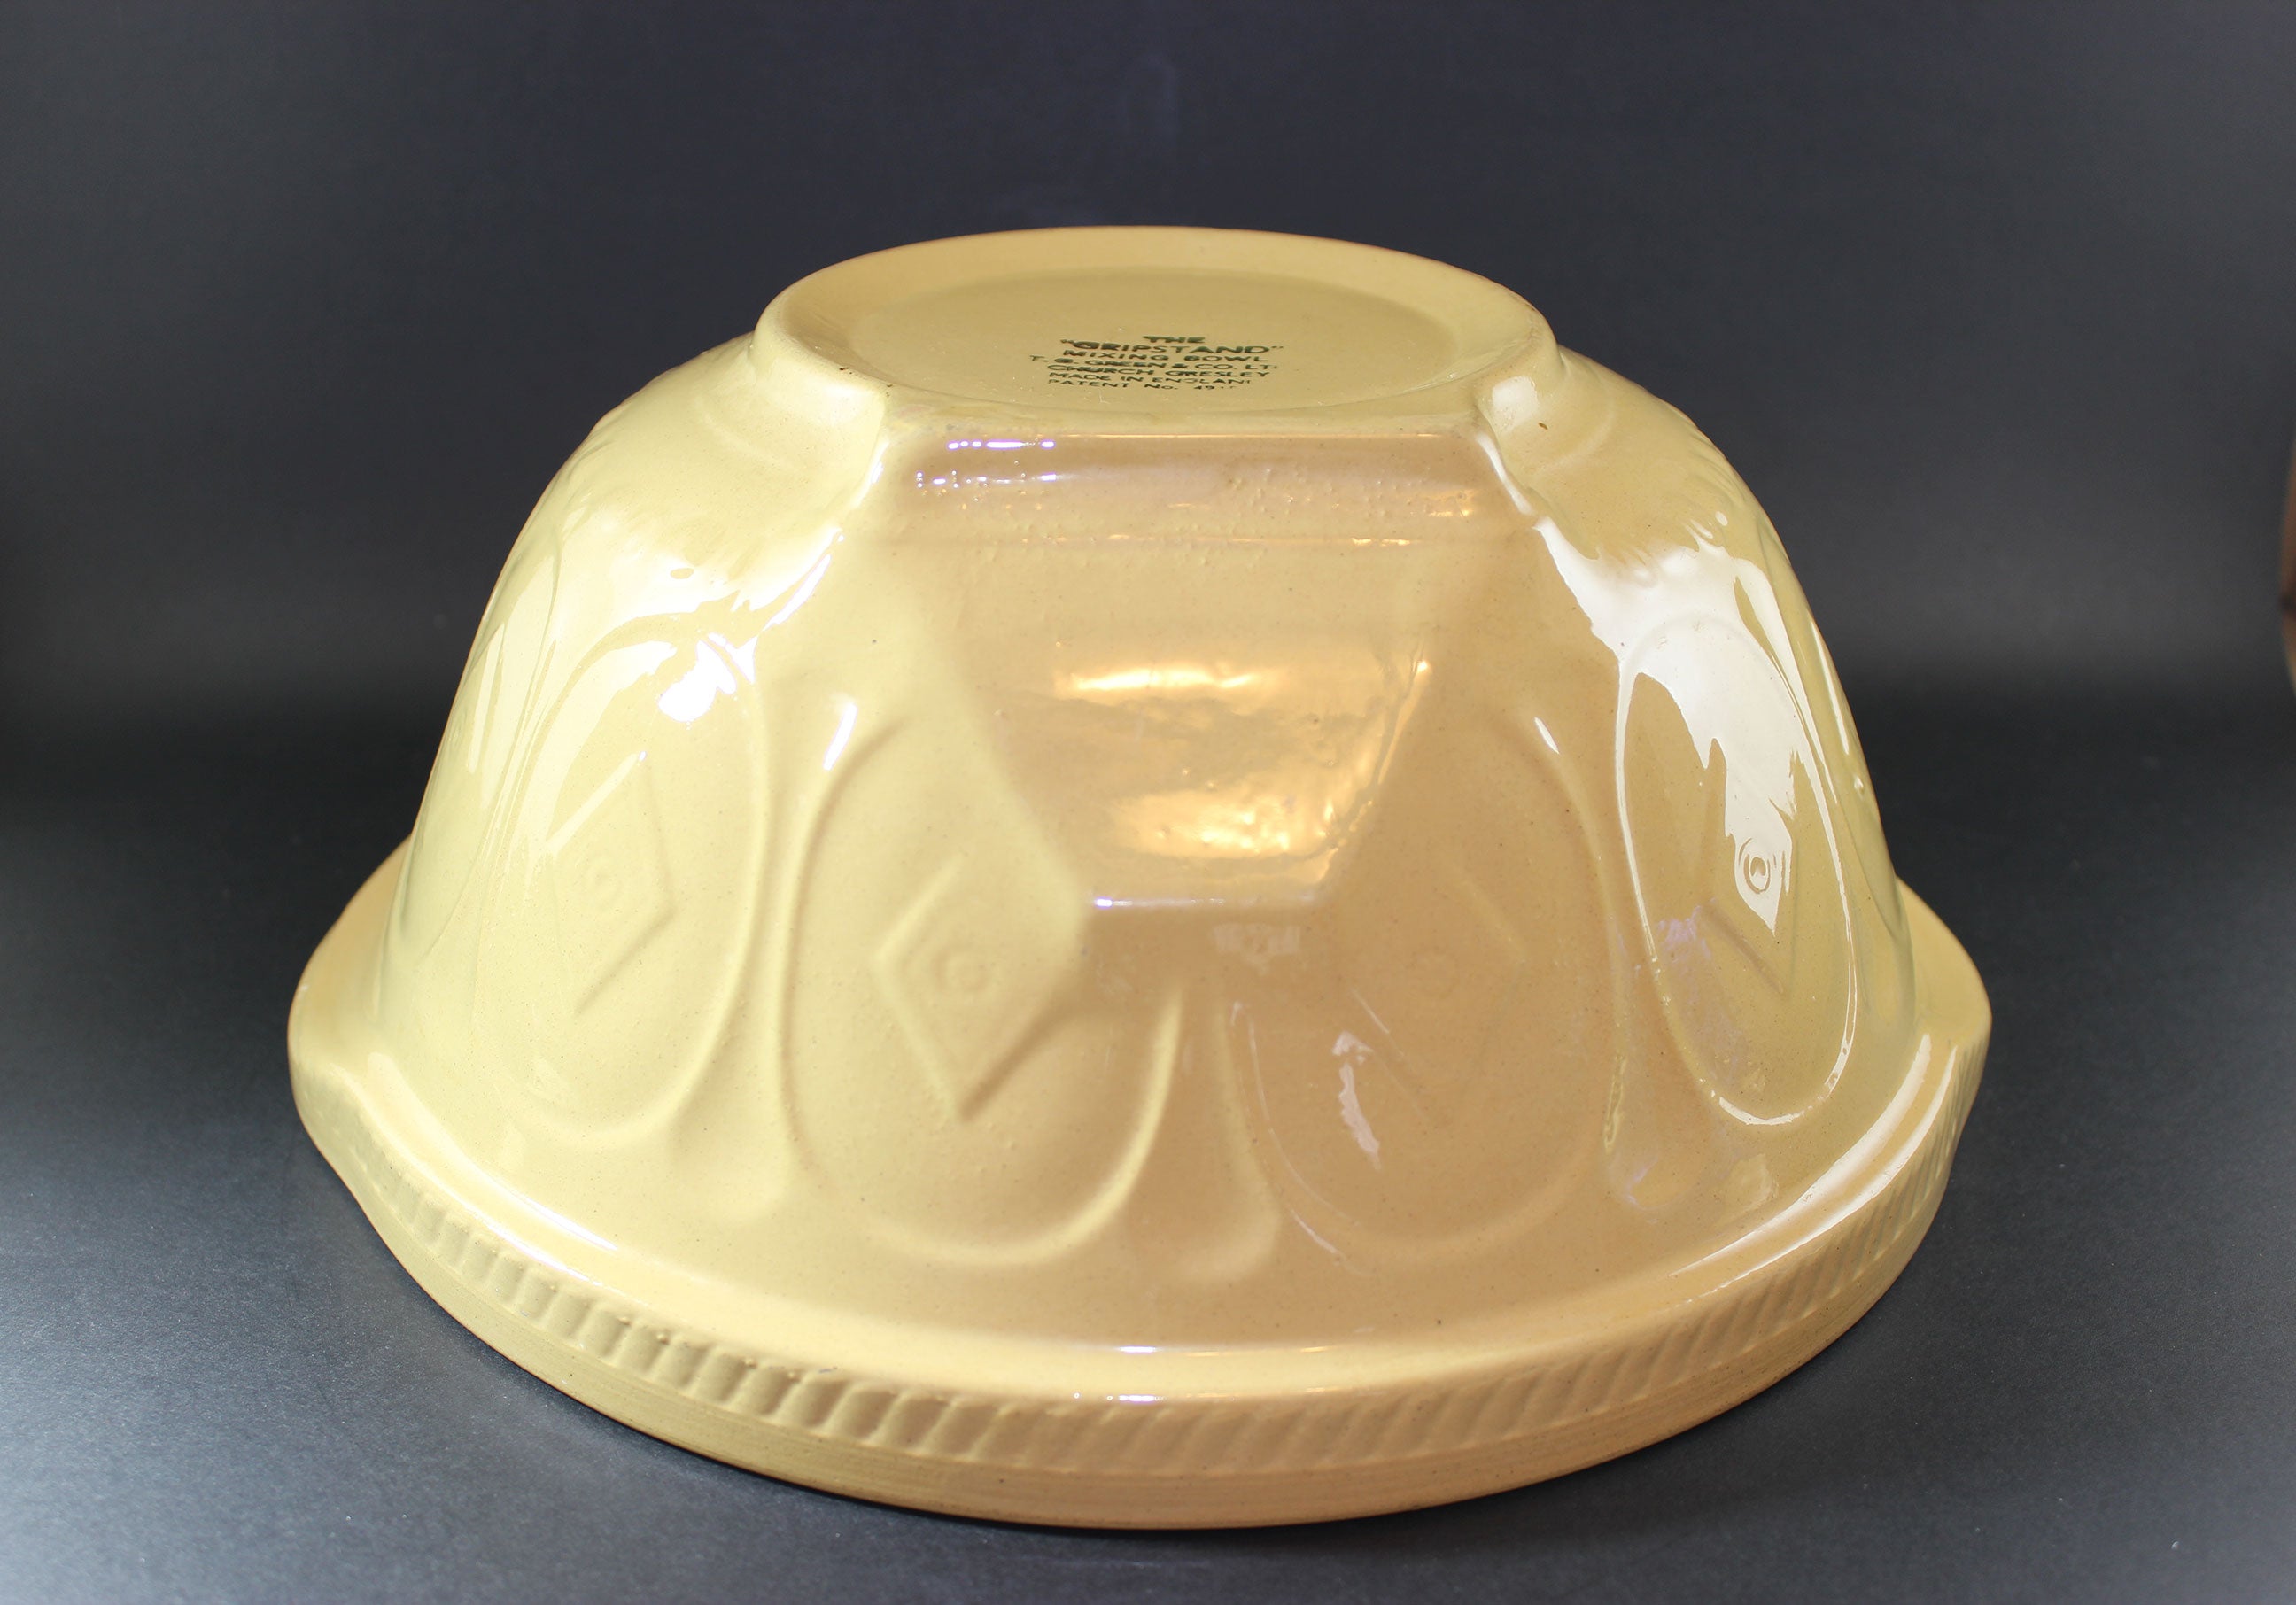 T. G. Green, Vintage Yellow Ware Gripstand Mixing Bowl, 11 Inch